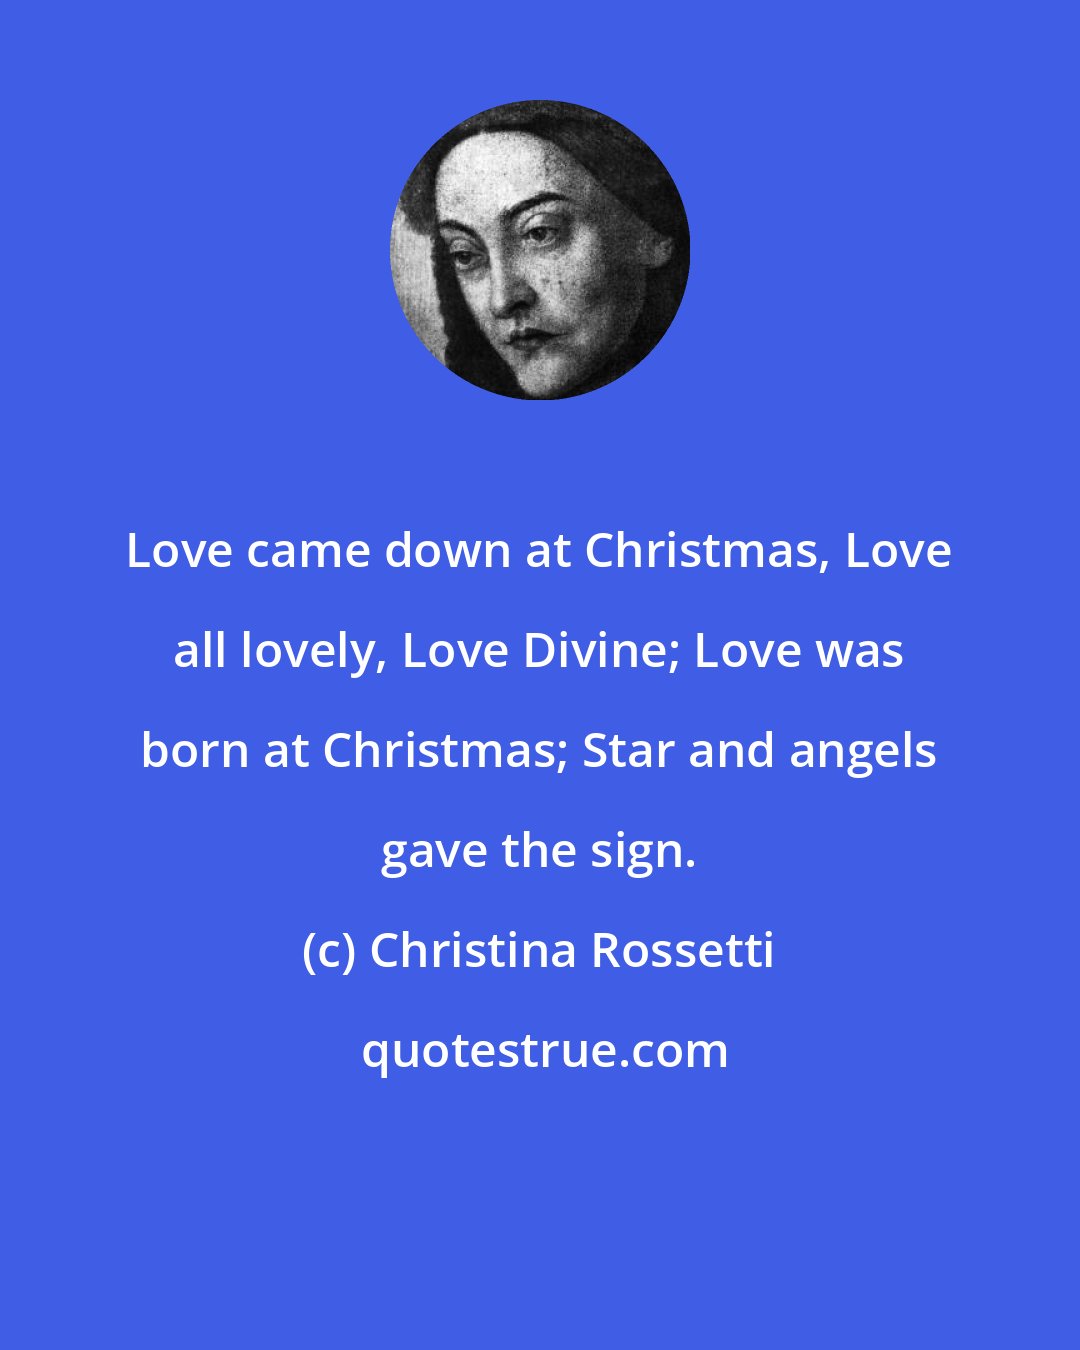 Christina Rossetti: Love came down at Christmas, Love all lovely, Love Divine; Love was born at Christmas; Star and angels gave the sign.